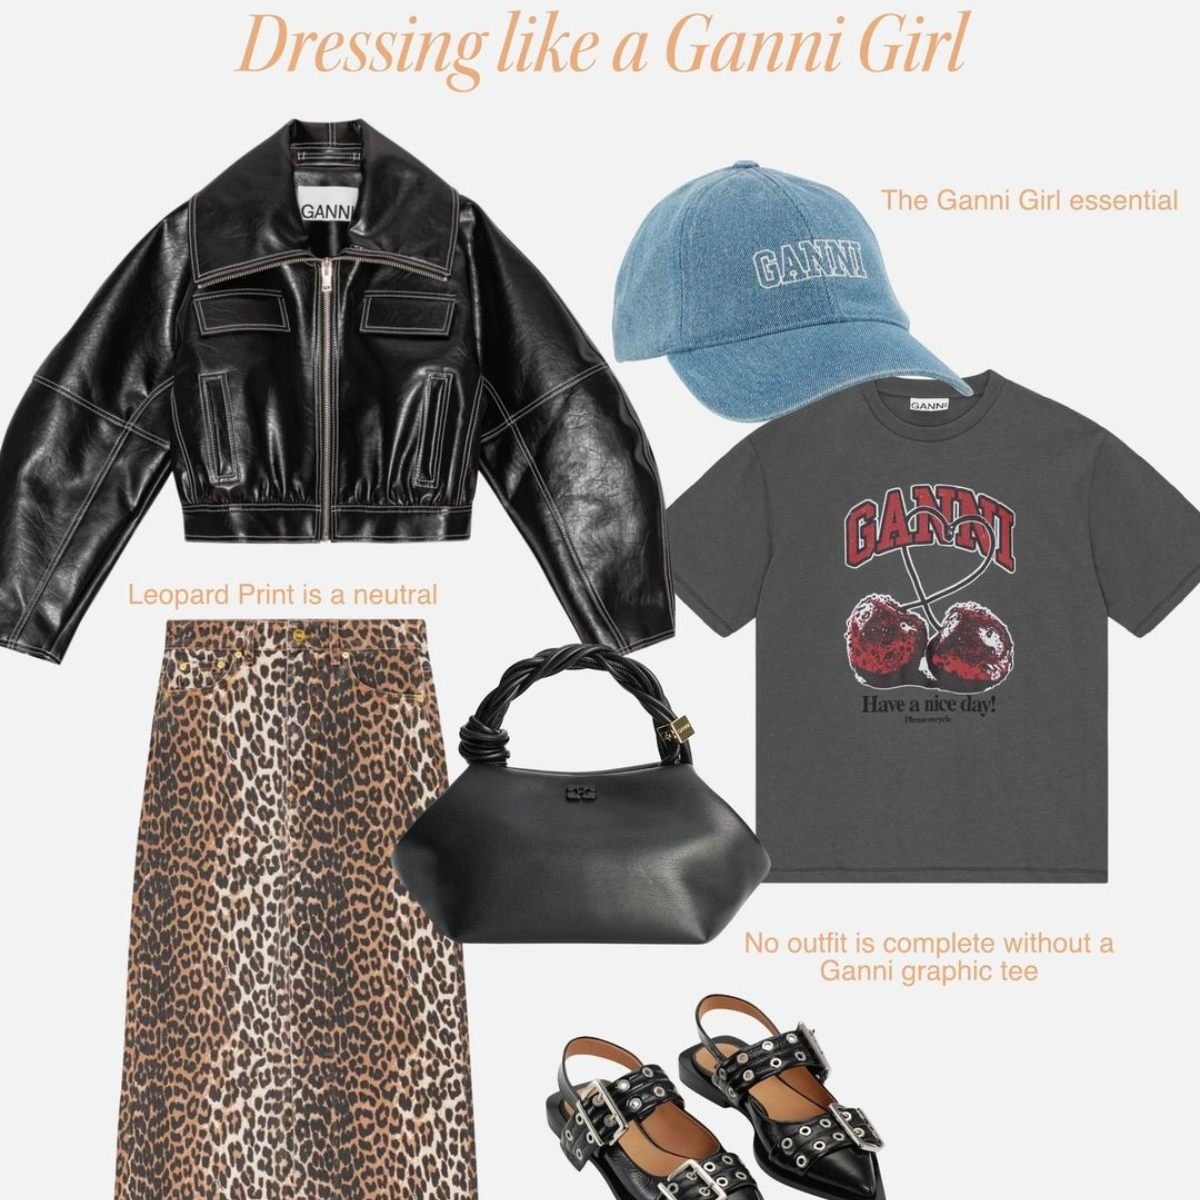 GANNI Girl Outfit